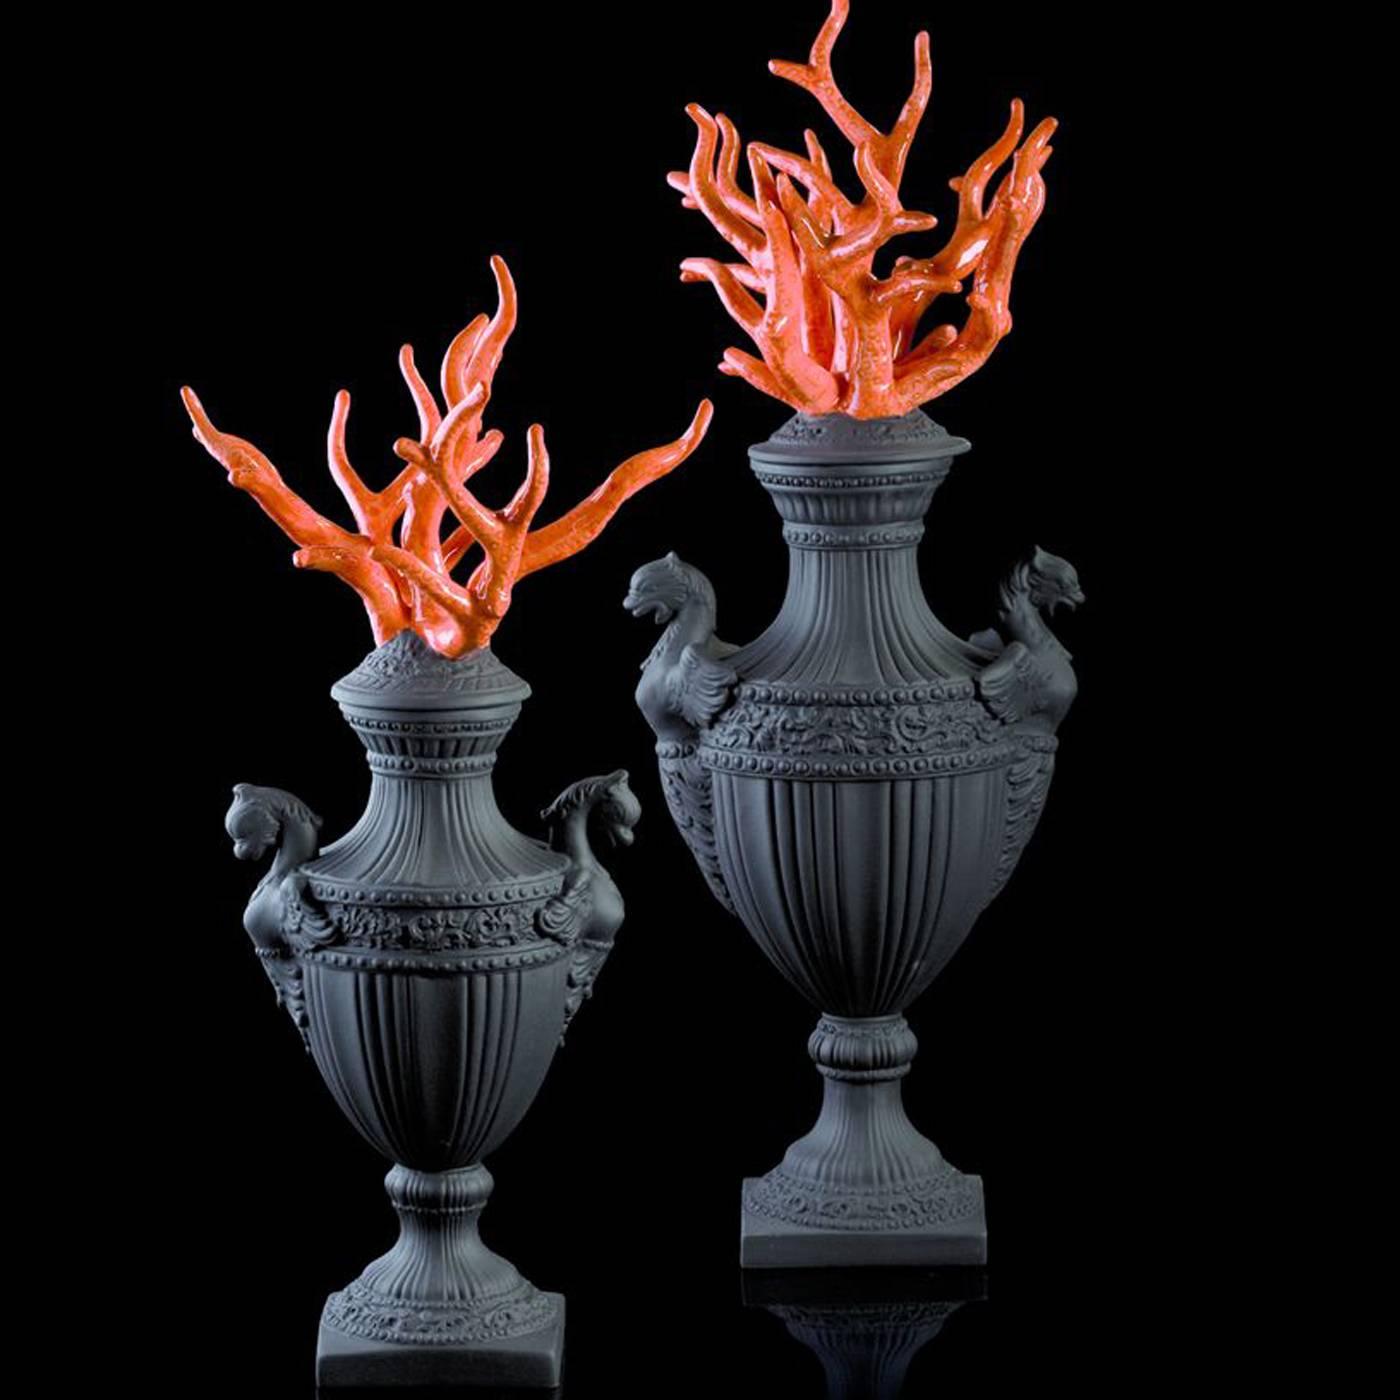 This elegant piece is made of an elaborately Baroque vase with a matte black finish and featuring two marine-inspired figurines on its sides. The lid is strikingly decorated with branches of coral in vivid red ceramic with a polished finish.